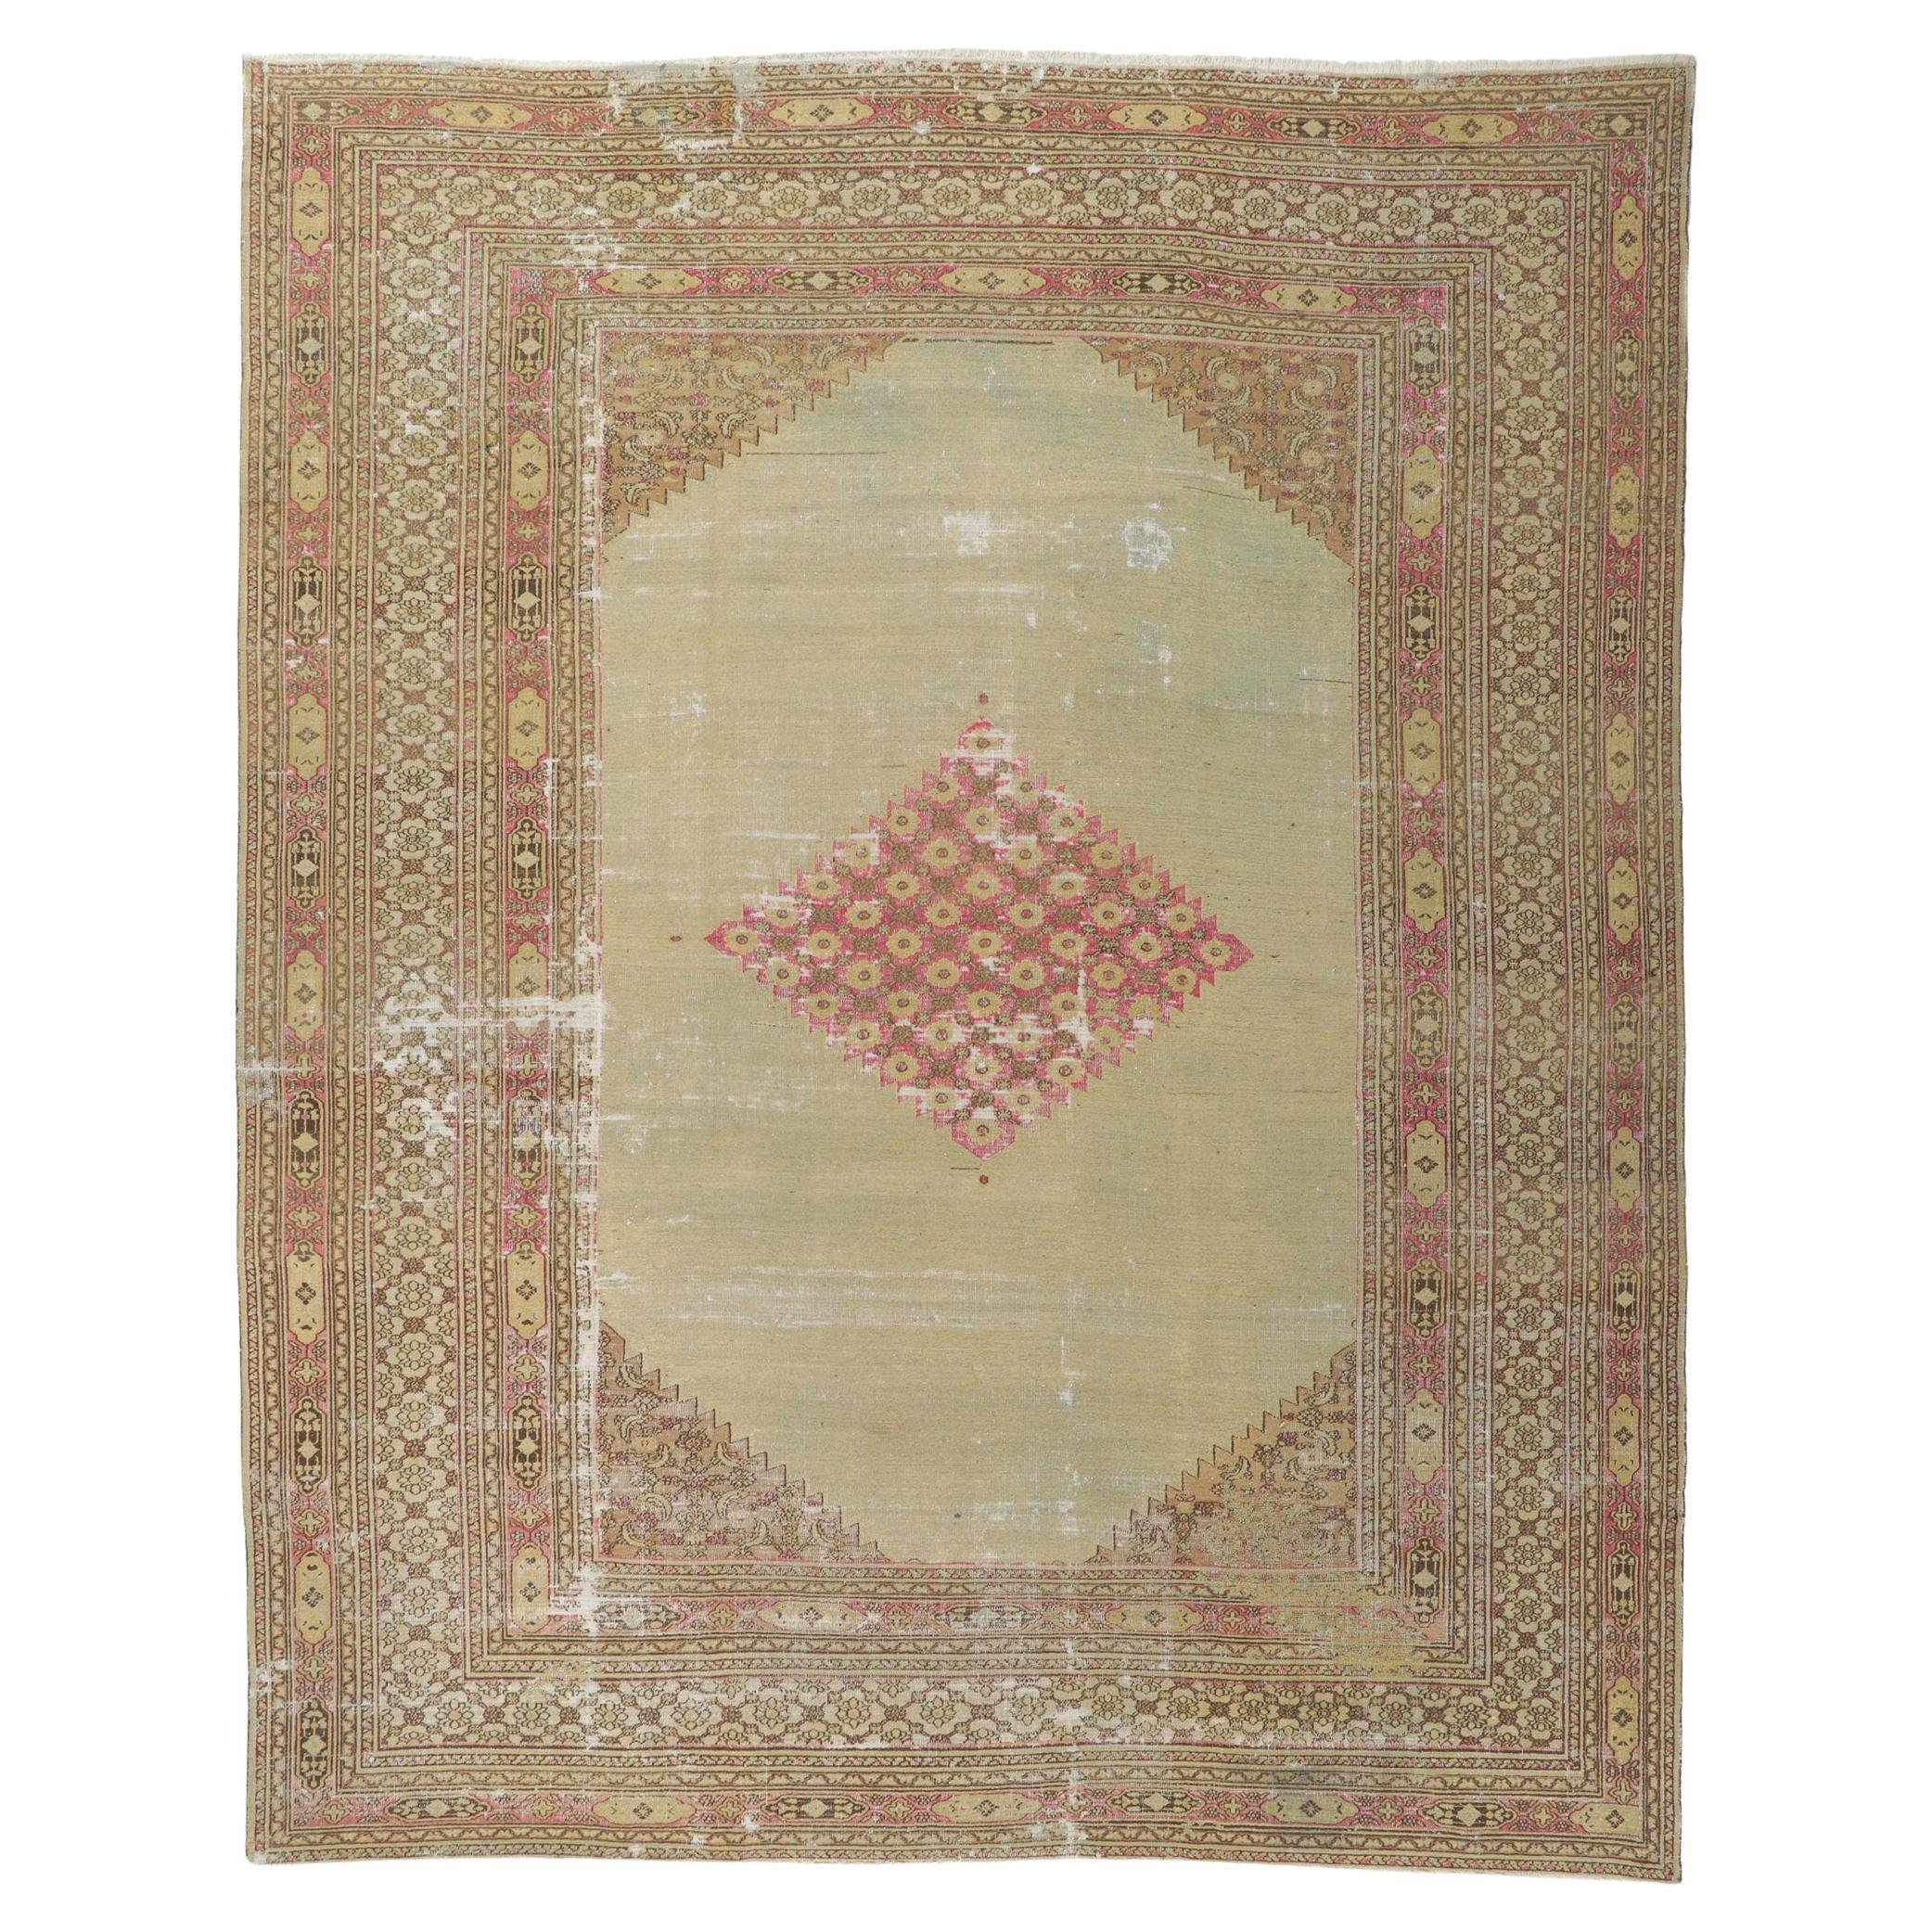 Late 19th Century Antique Persian Khorassan Rug with English Manor Style